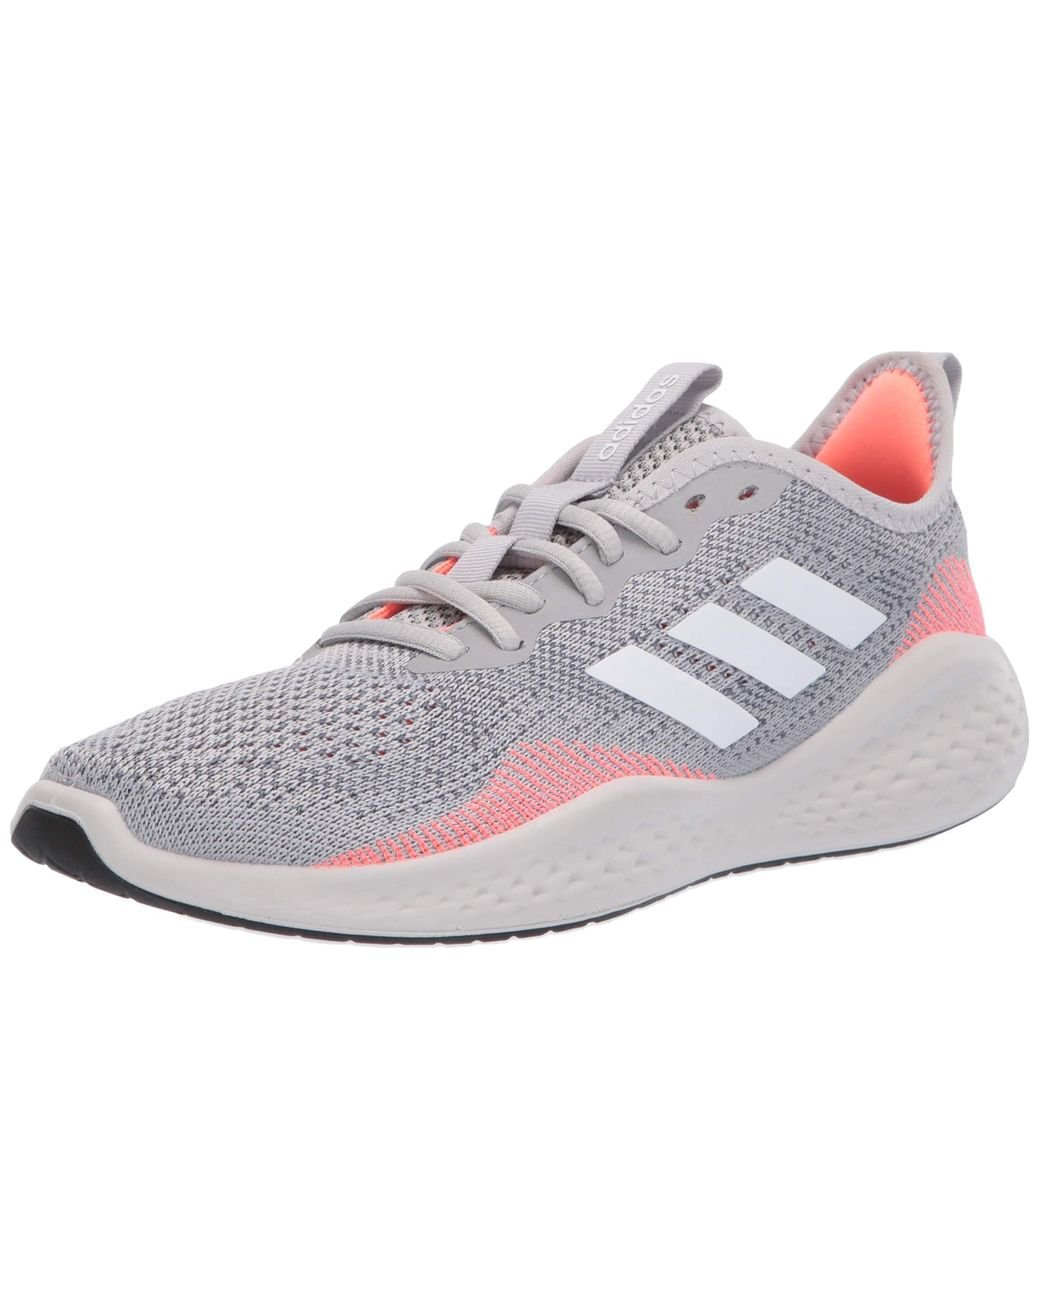 adidas Fluidflow Shoes in Grey (Gray) for Men - Save 39% - Lyst